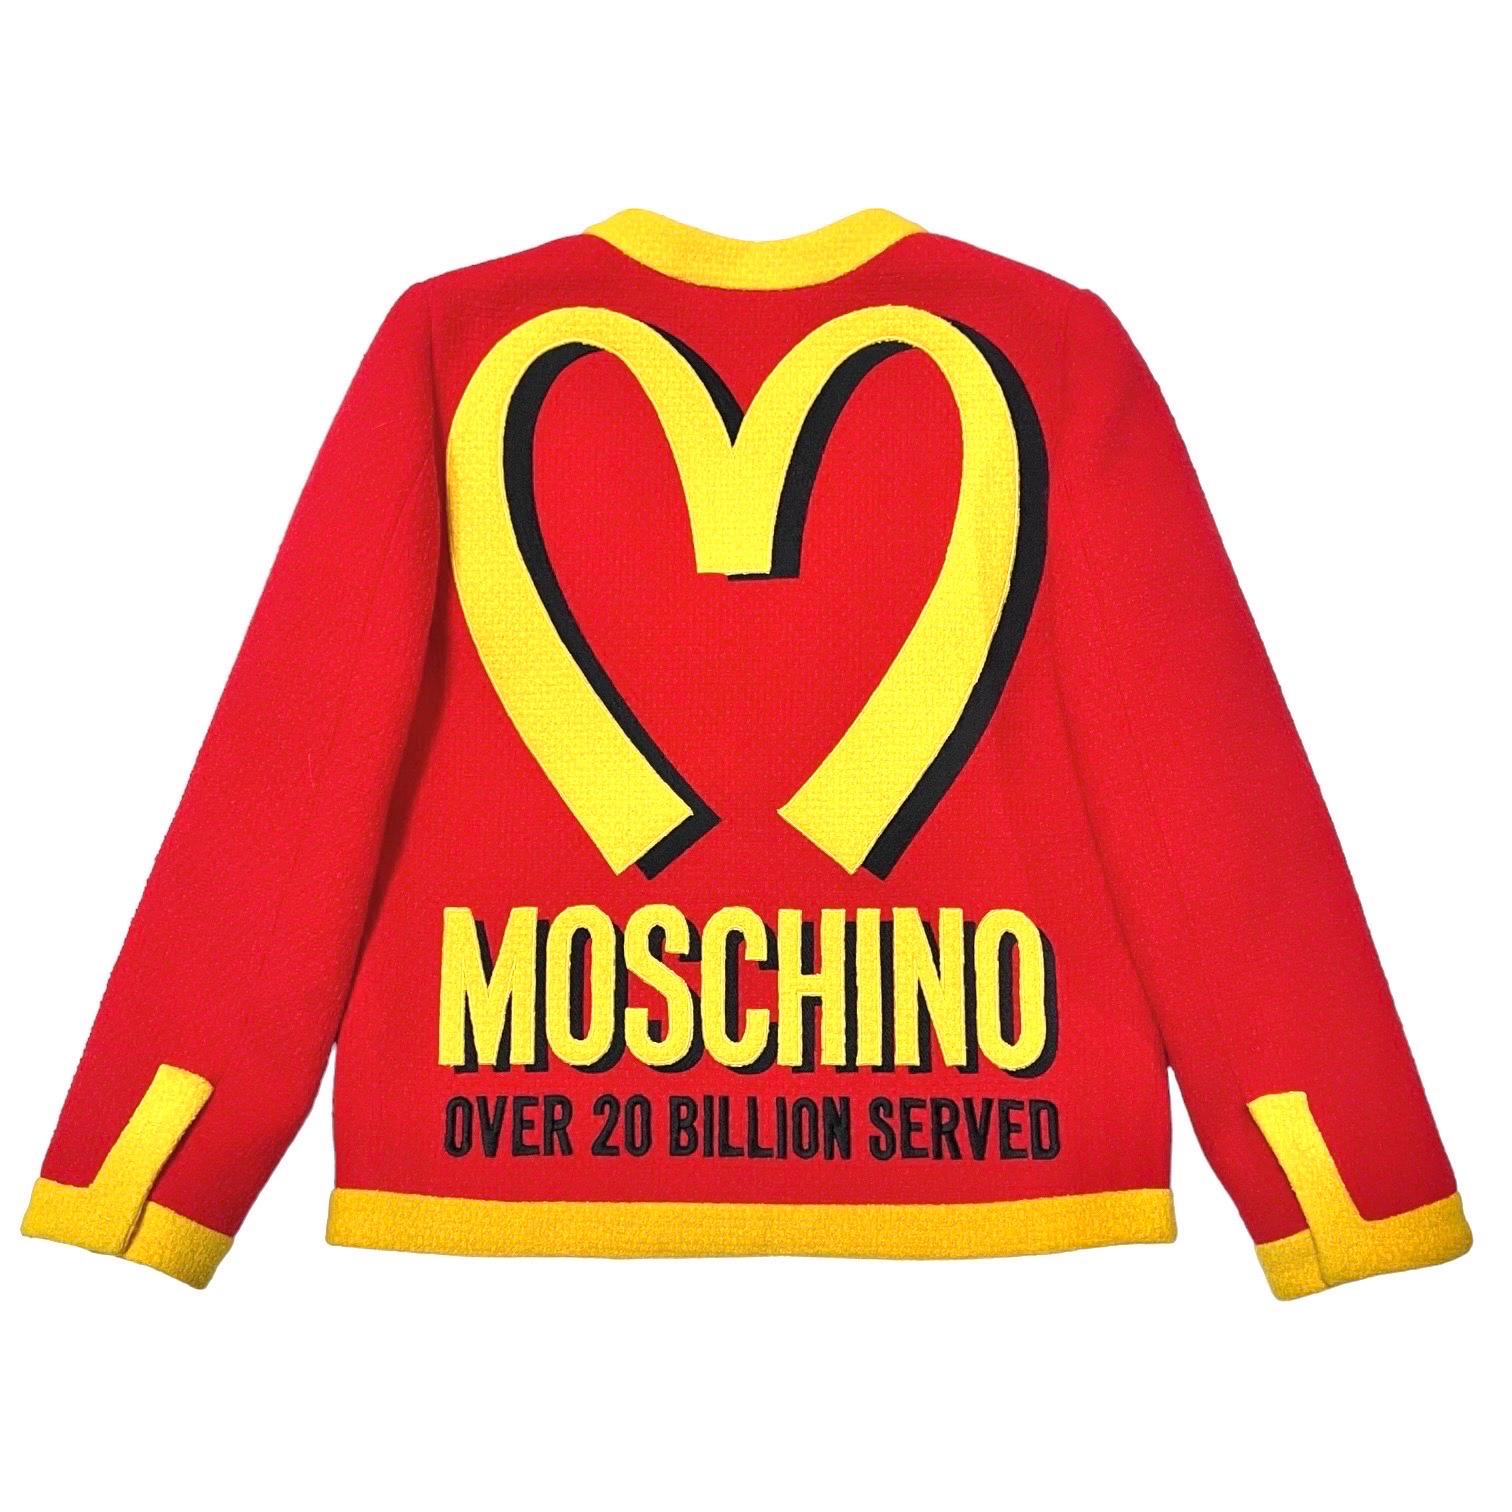 Moschino Couture McDonalds Runway Tweed Blazer F/W 2014 For Sale 1